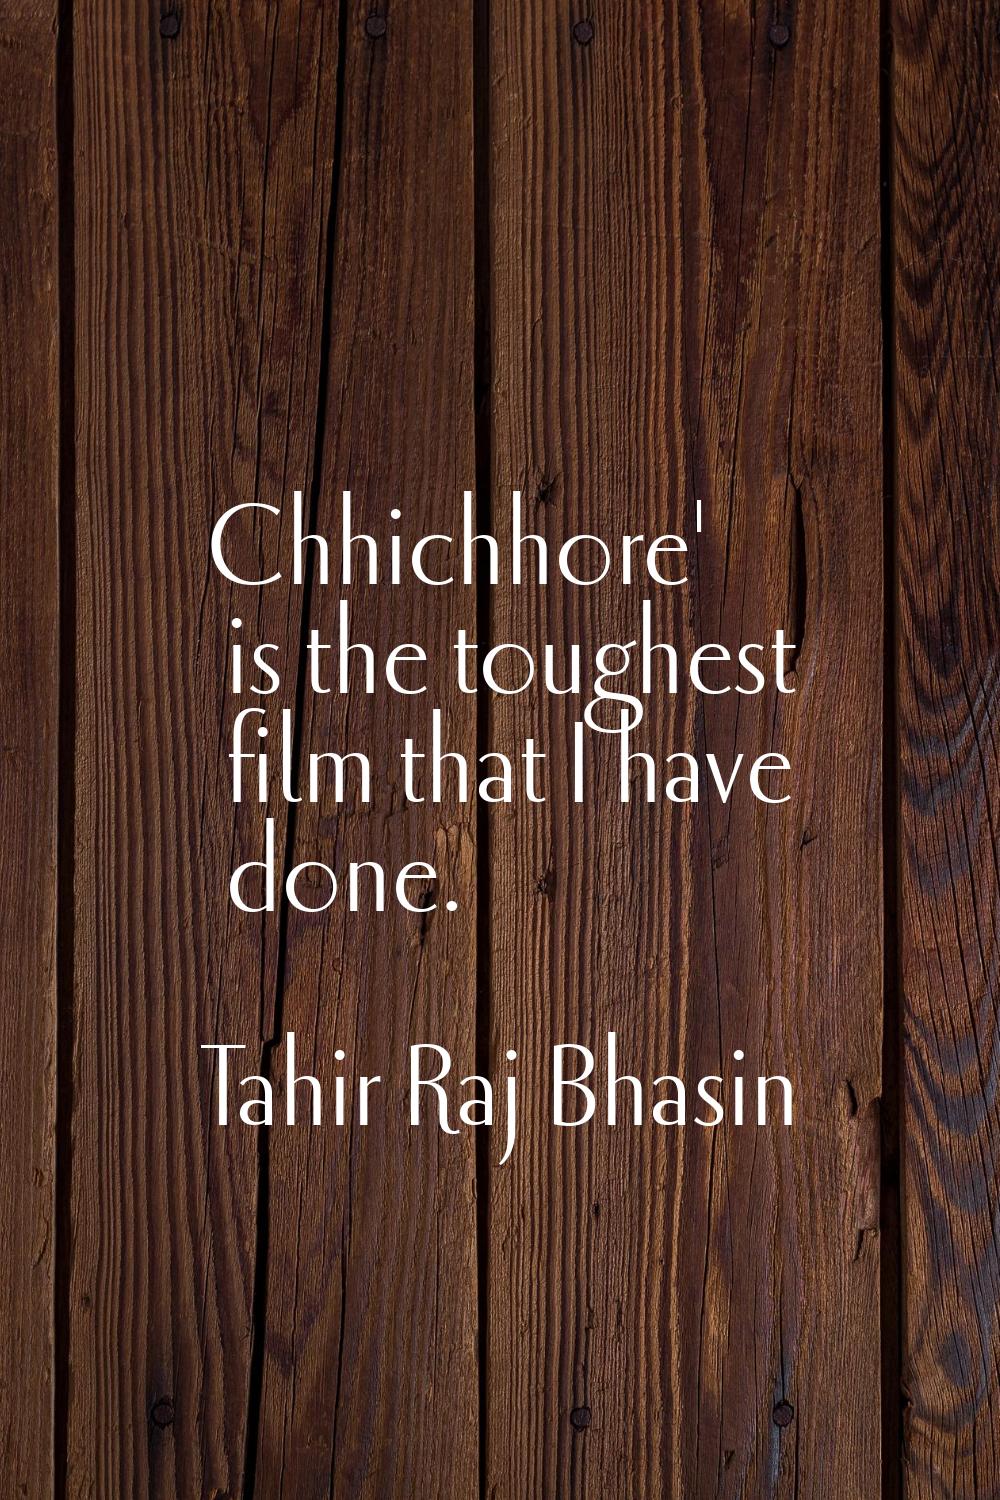 Chhichhore' is the toughest film that I have done.